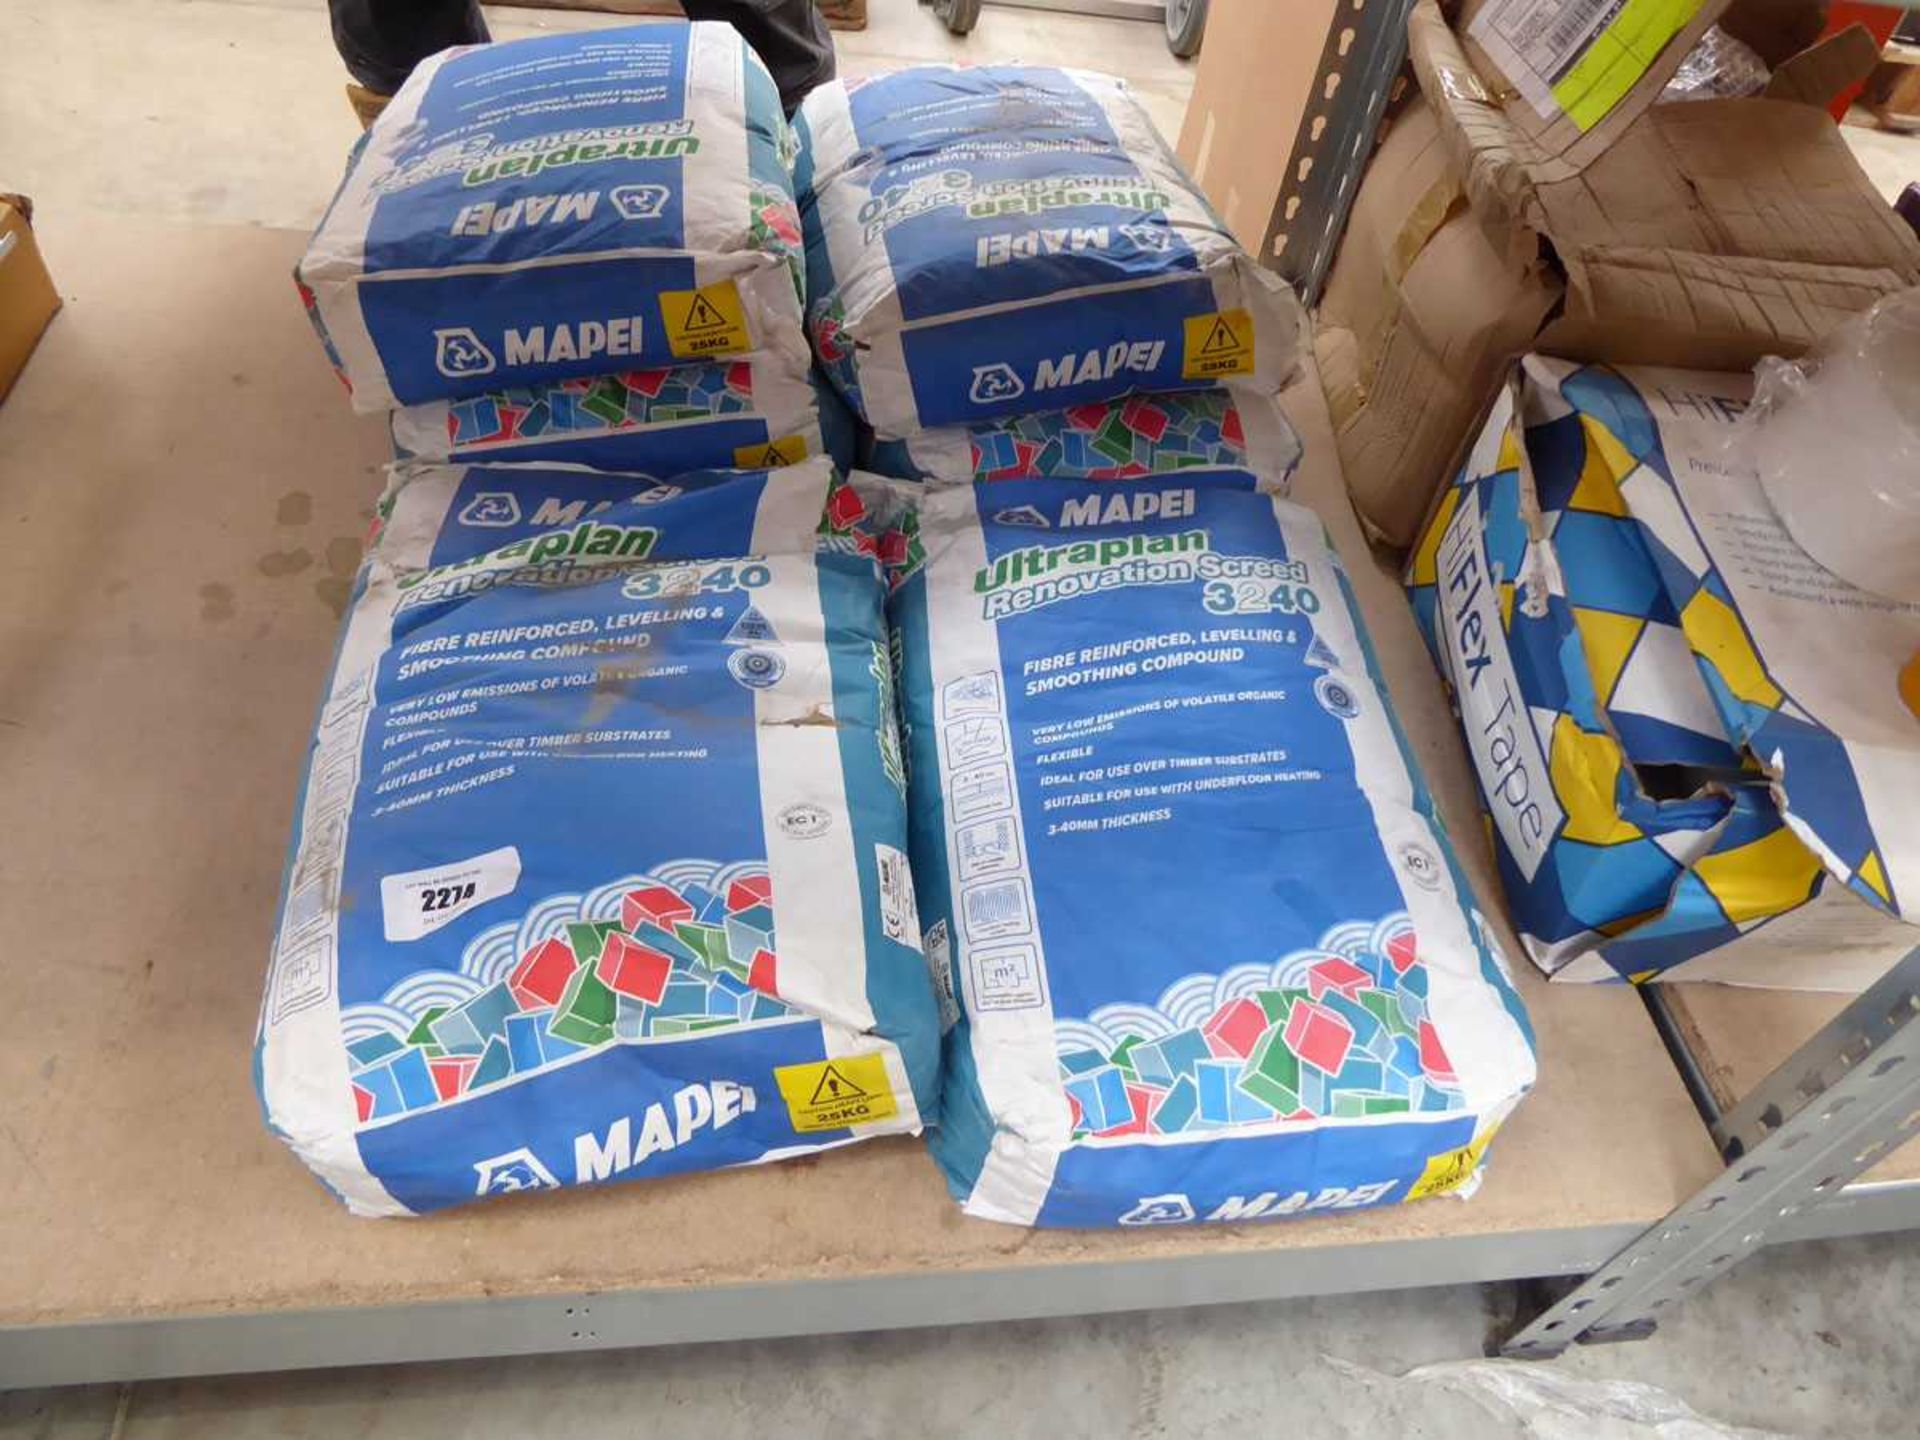 +VAT Six 20kg bag of Mapei fibre reinforced, levelling and smoothing compound